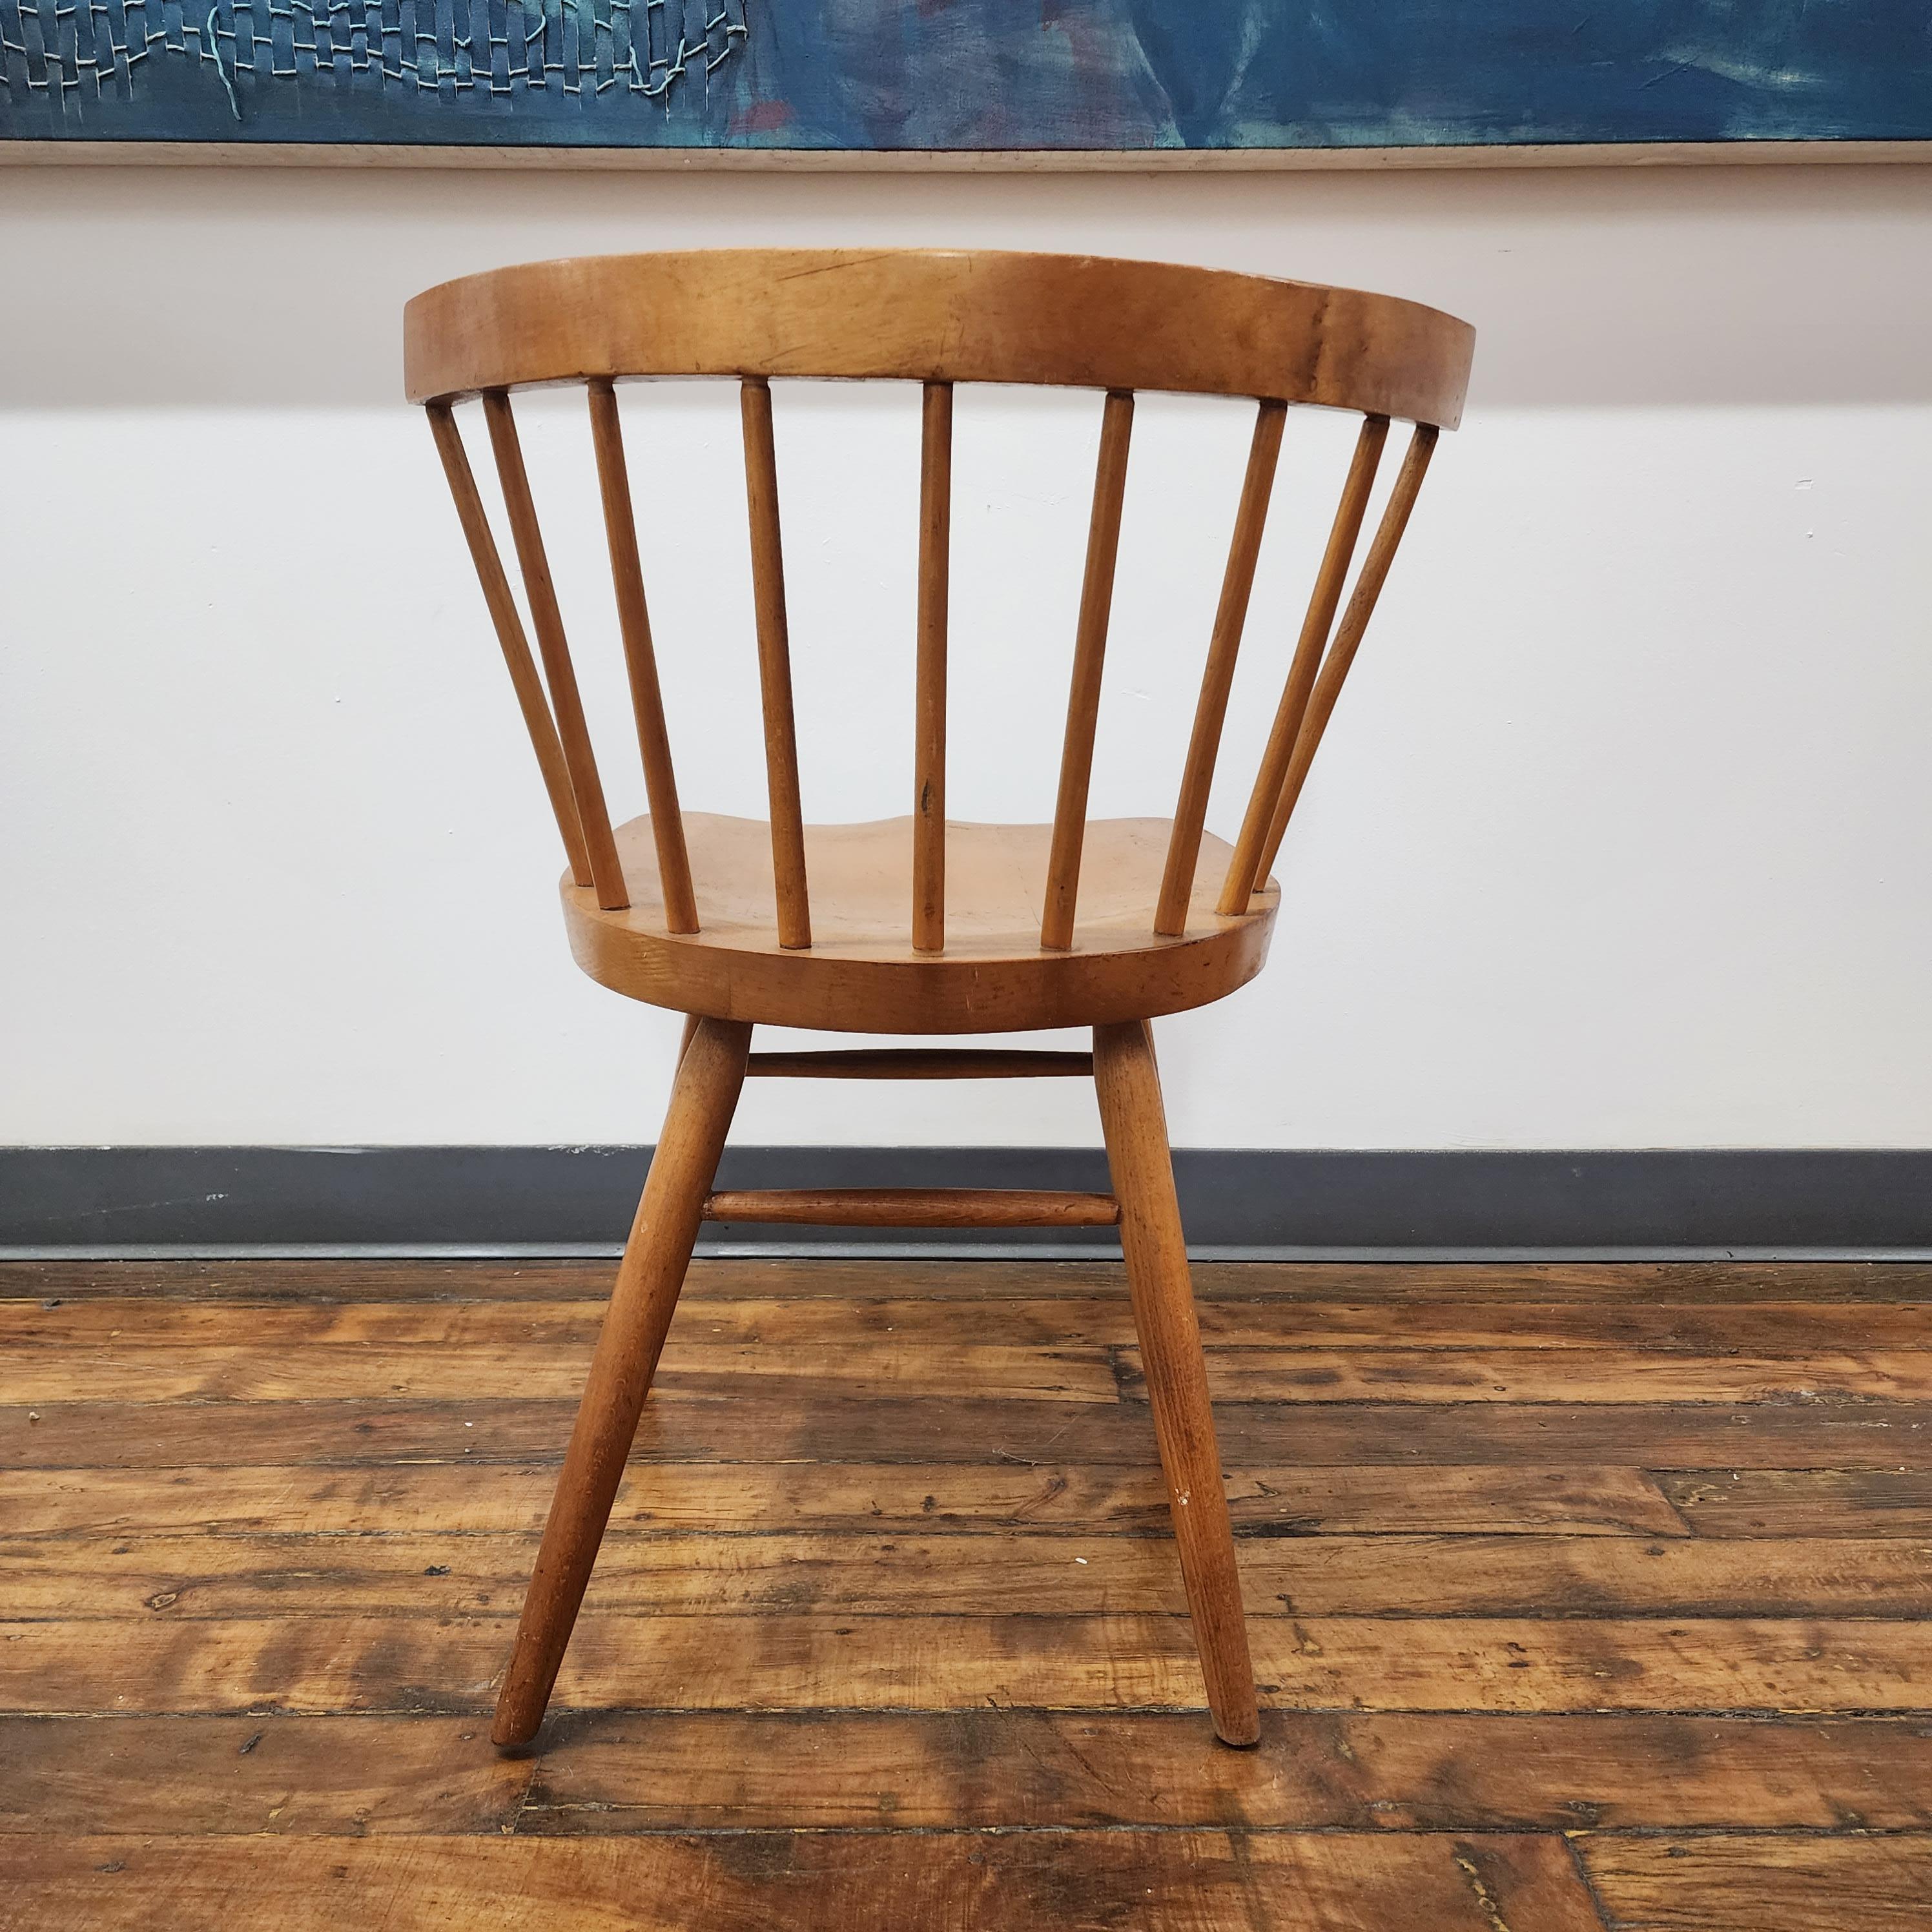 Beautiful early version of the N19 straight back chair in birch. Designed and made by George Nakashima and sold by Knoll associates.  this early version features the tapered seat and marked on the underside with a wax pen 